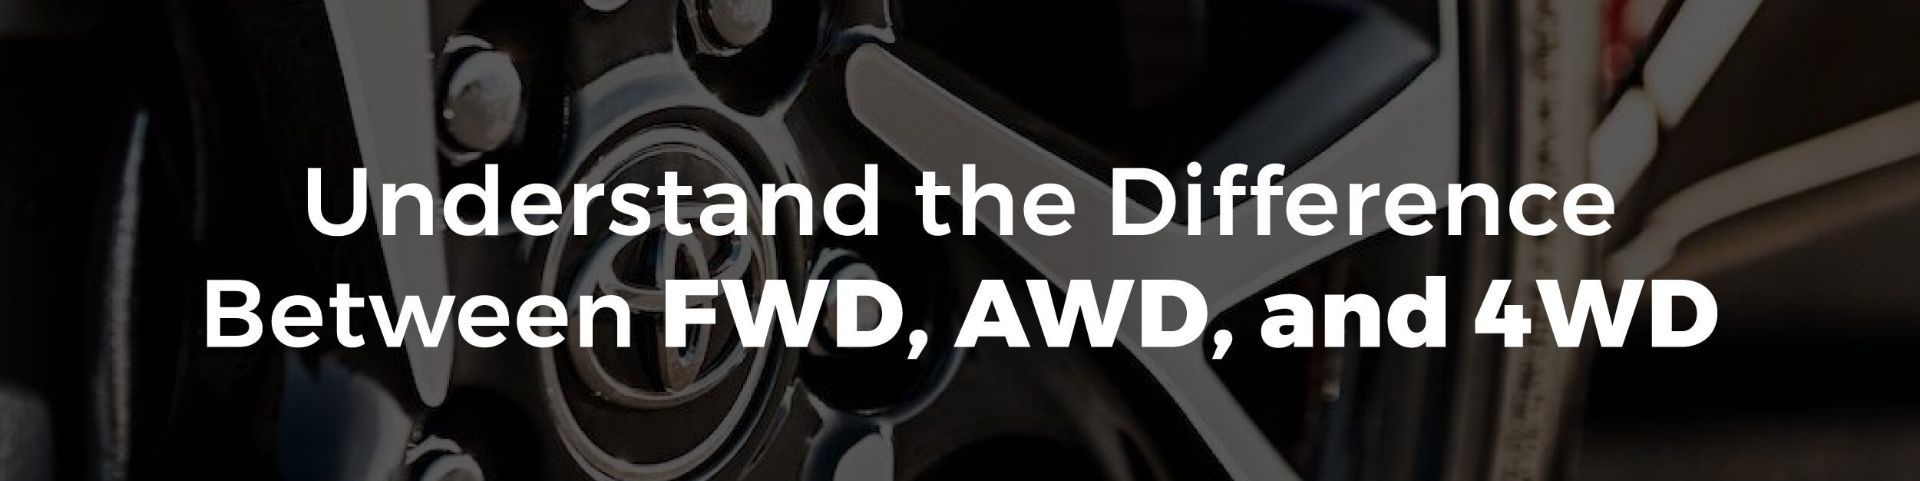 Understand The Difference Between FWD, AWD, And 4WD